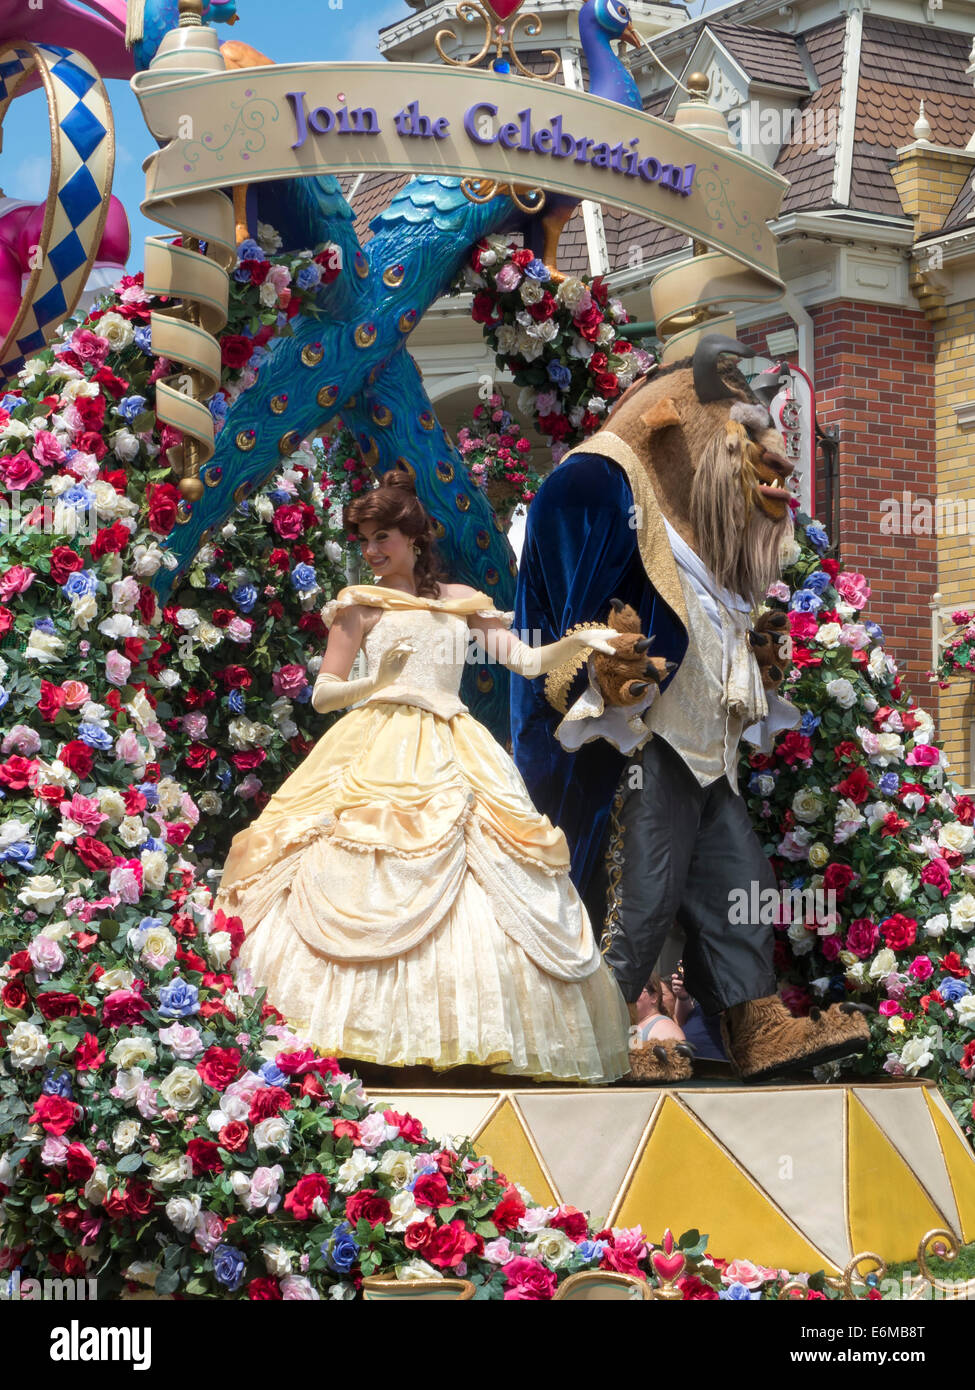 Belle and the Beast float in the Parade at Disney's Magic Kingdom Stock Photo